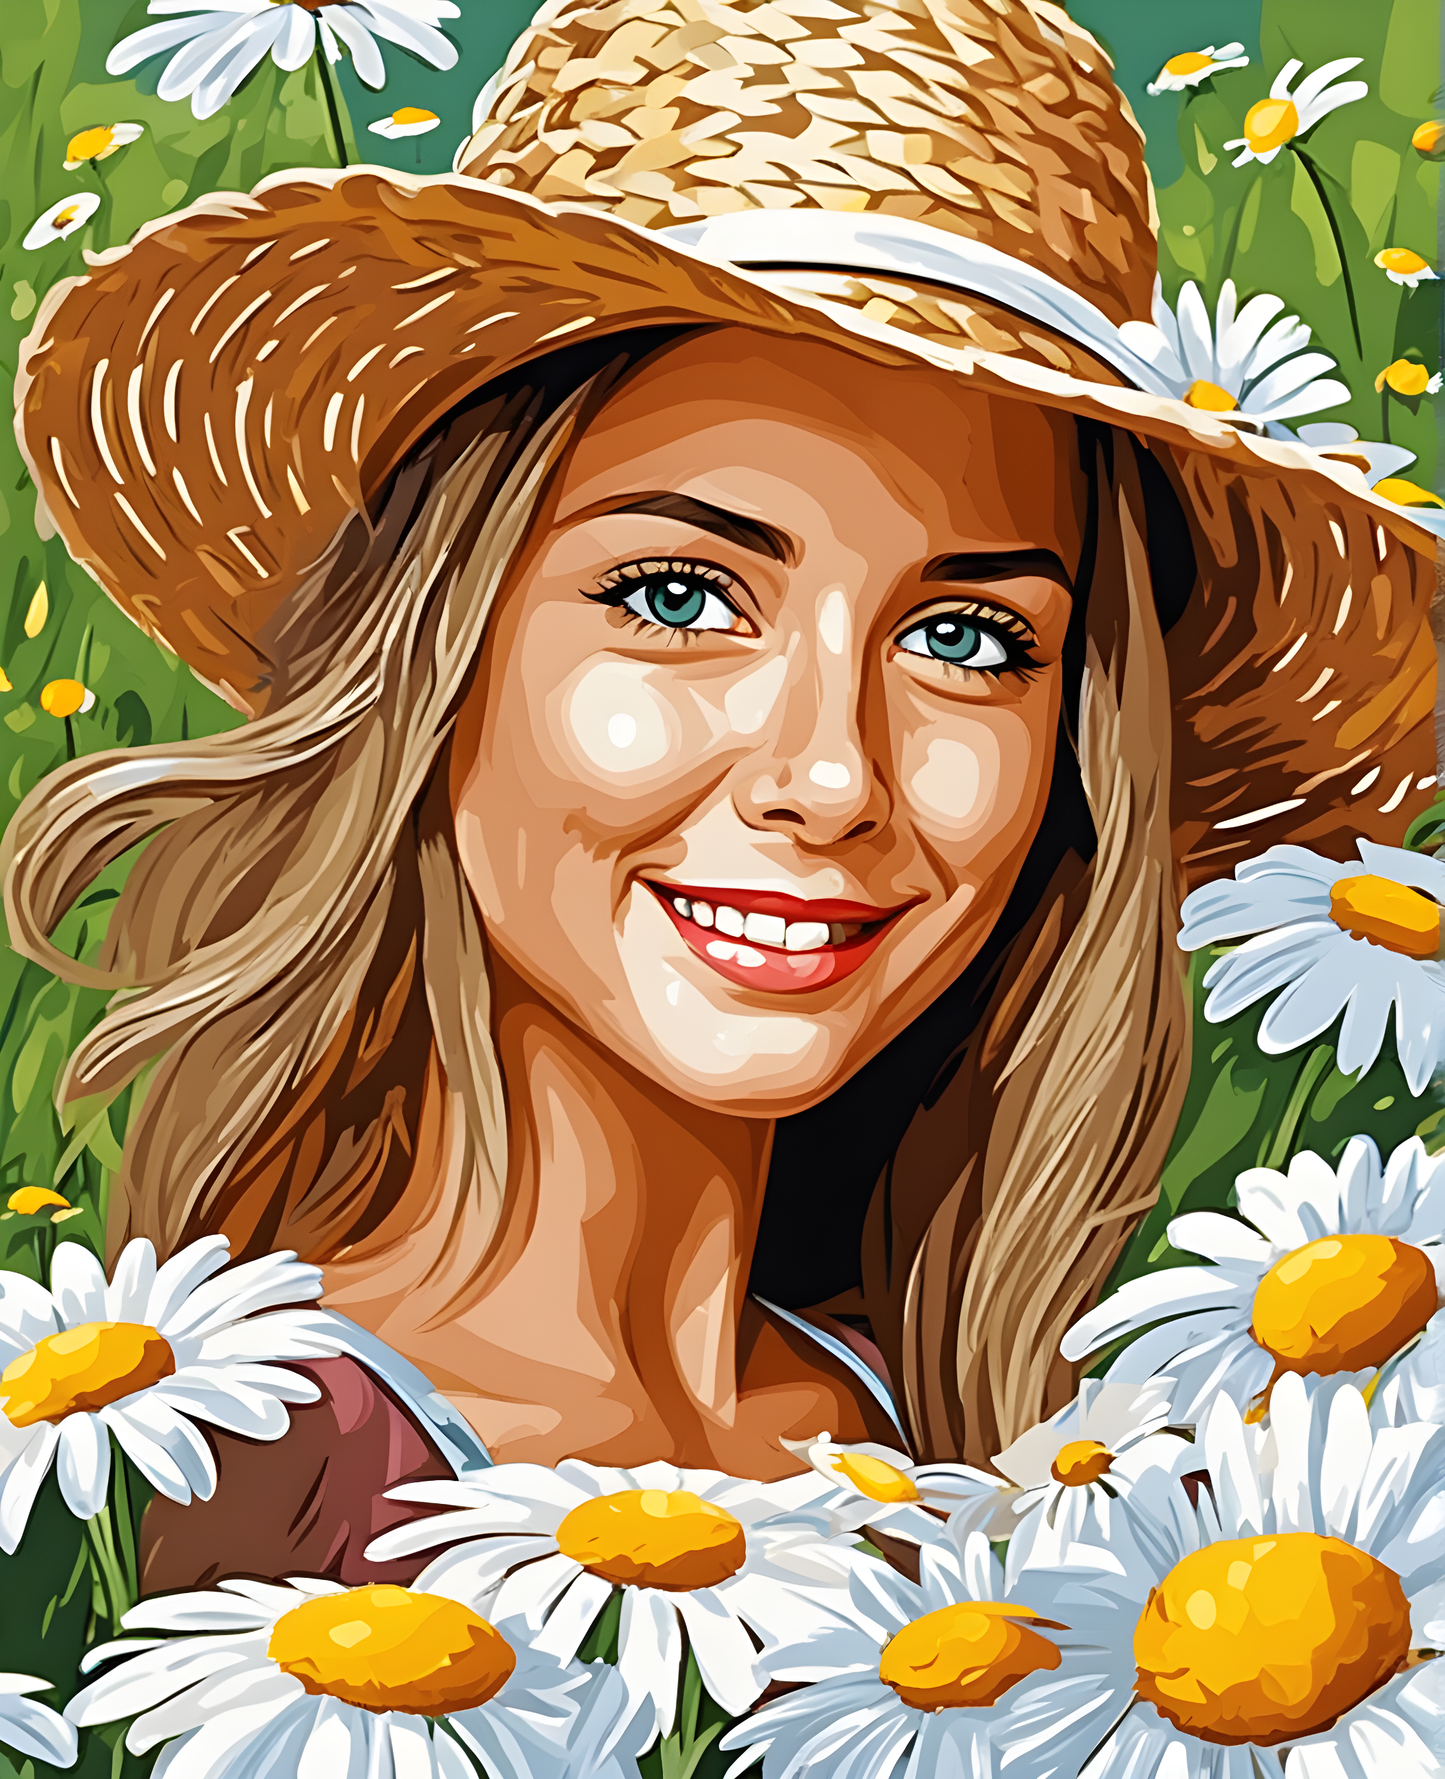 Straw Hat and Daisies (2) - Van-Go Paint-By-Number Kit